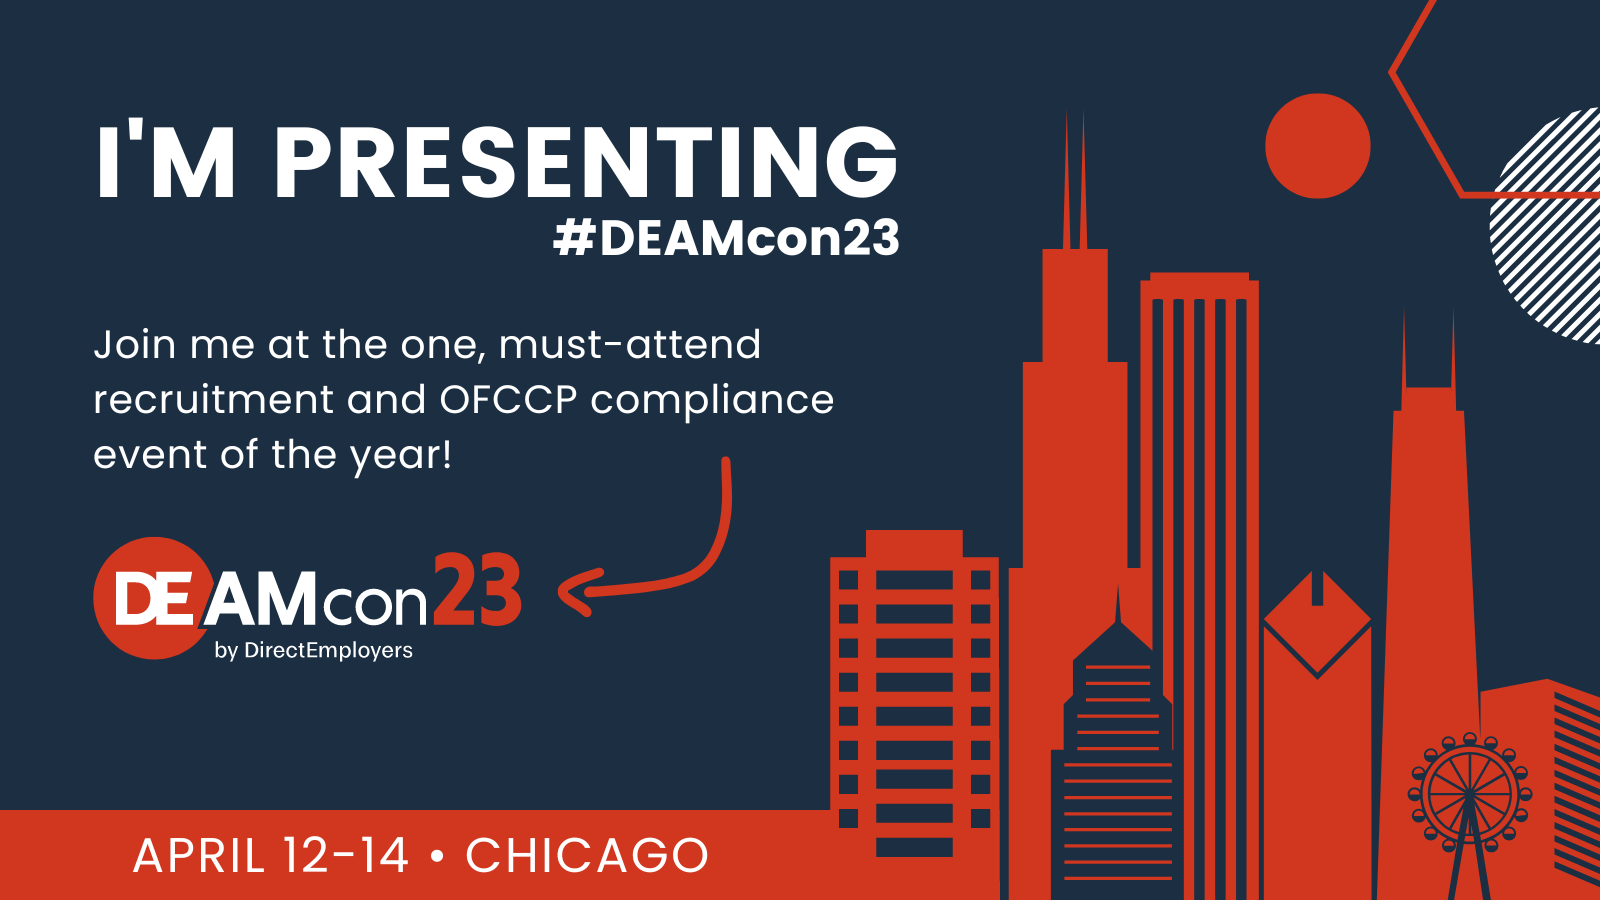 I'm presenting at DEAMcon23. Join me at the one, must-attend  recruitment and OFCCP compliance event of the year! April 12-14 in Chicago.